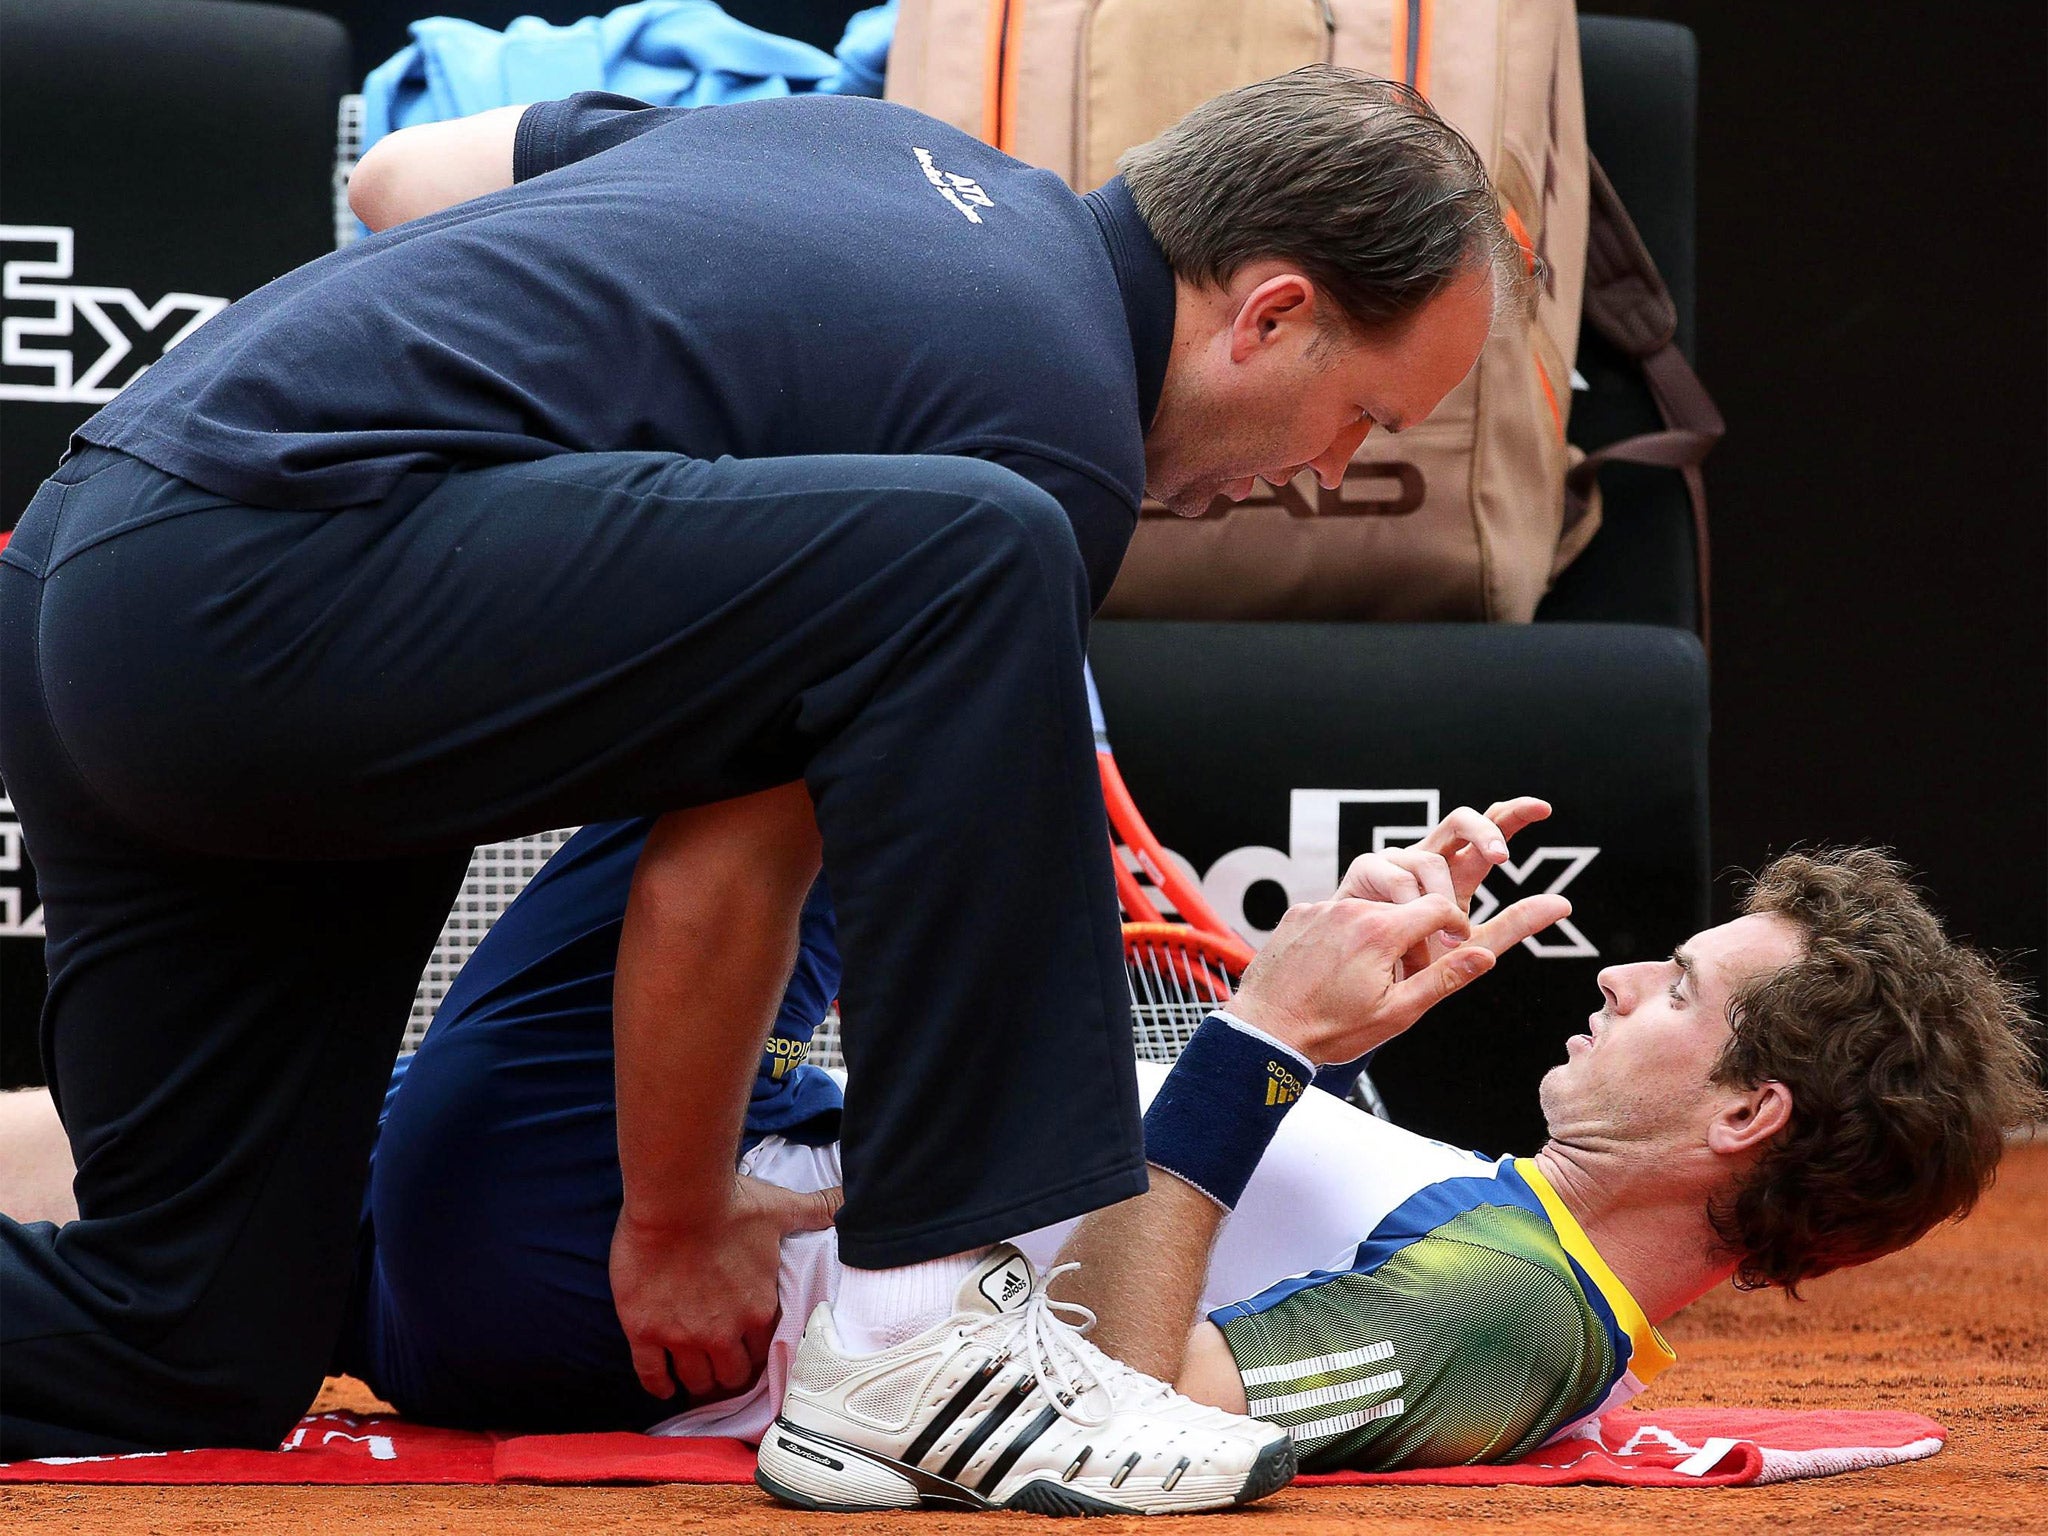 Andy Murray receives treatment on his back during his game in Rome against Marcel Granollers last week